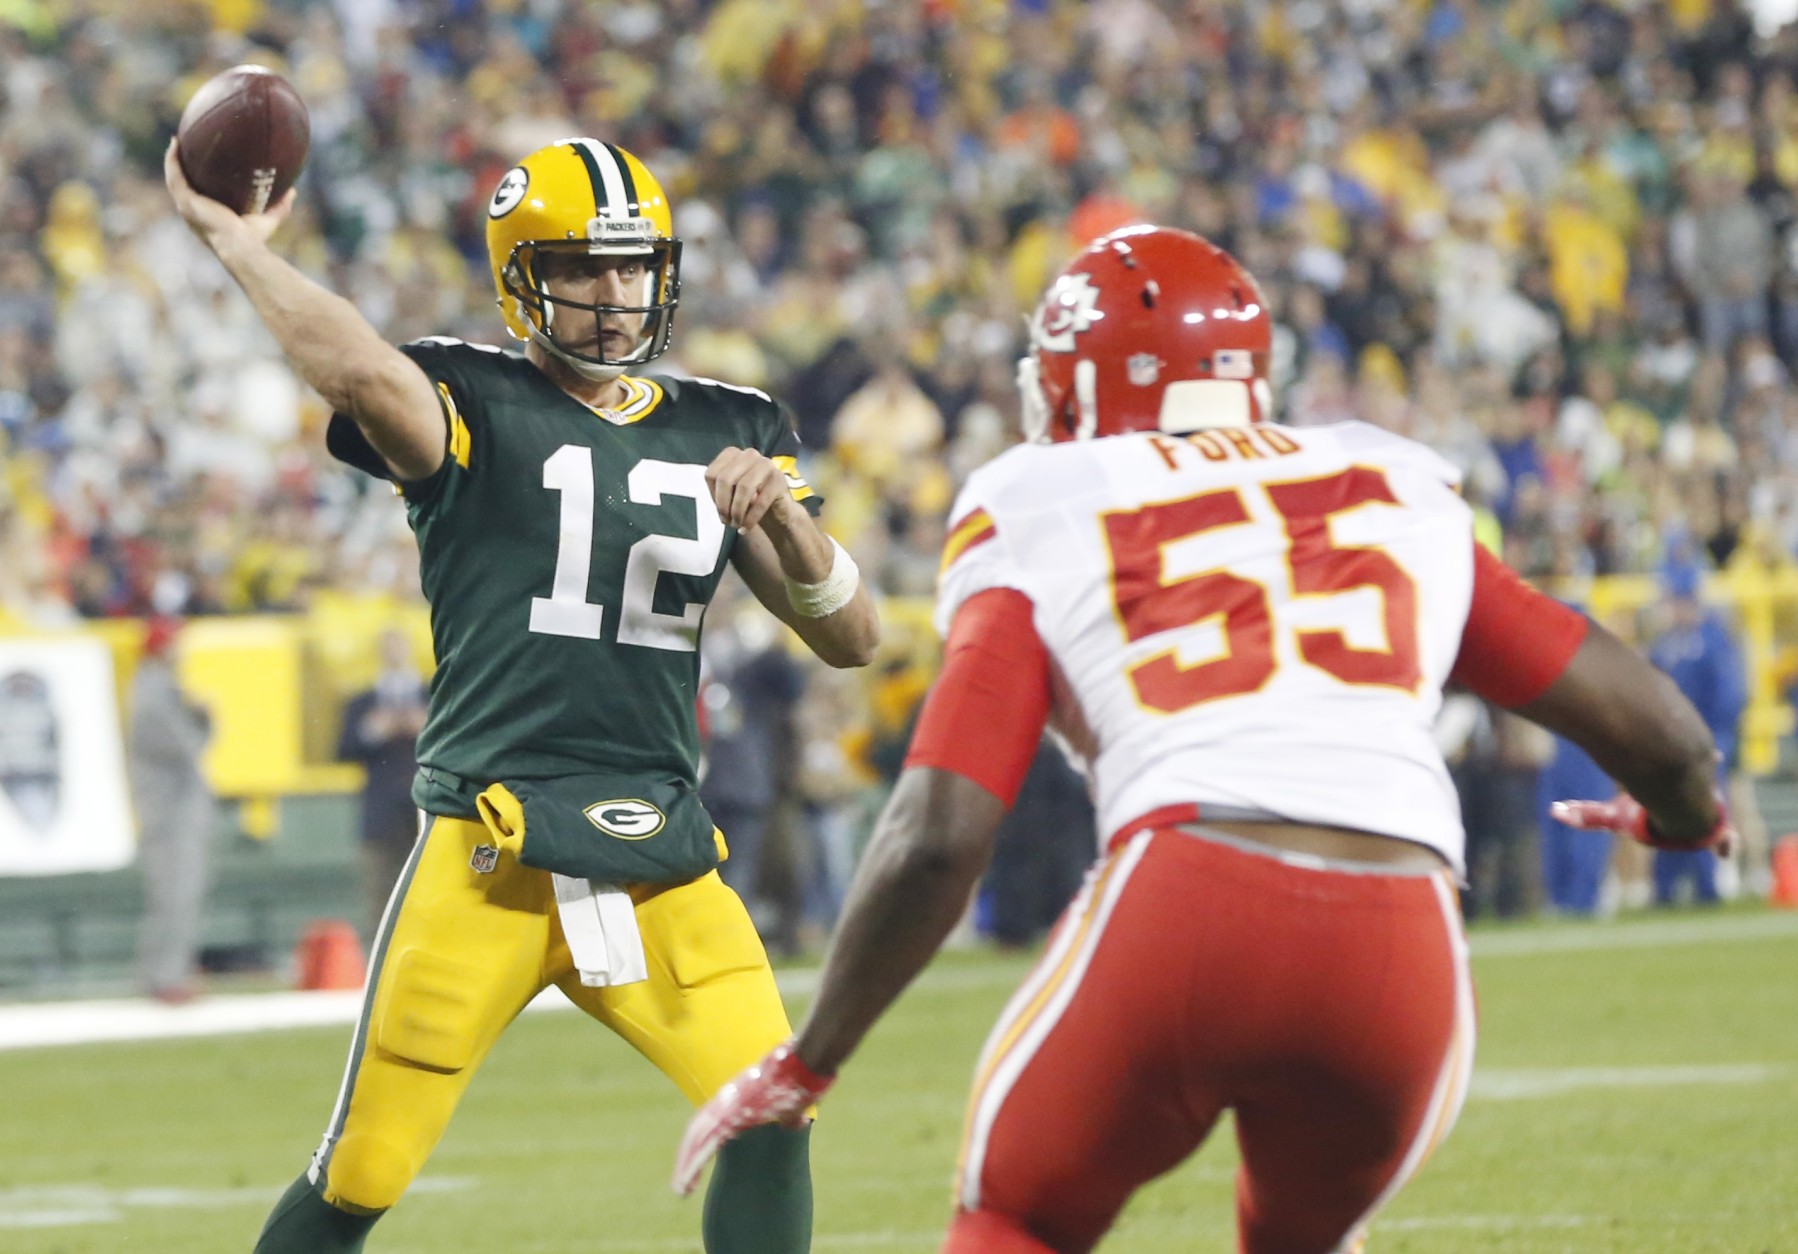 Green Bay Packers' Aaron Rodgers throws with Kansas City Chiefs' Dee Ford (55) rushing during the second half of an NFL football game Monday, Sept. 28, 2015, in Green Bay, Wis. (AP Photo/Mike Roemer)